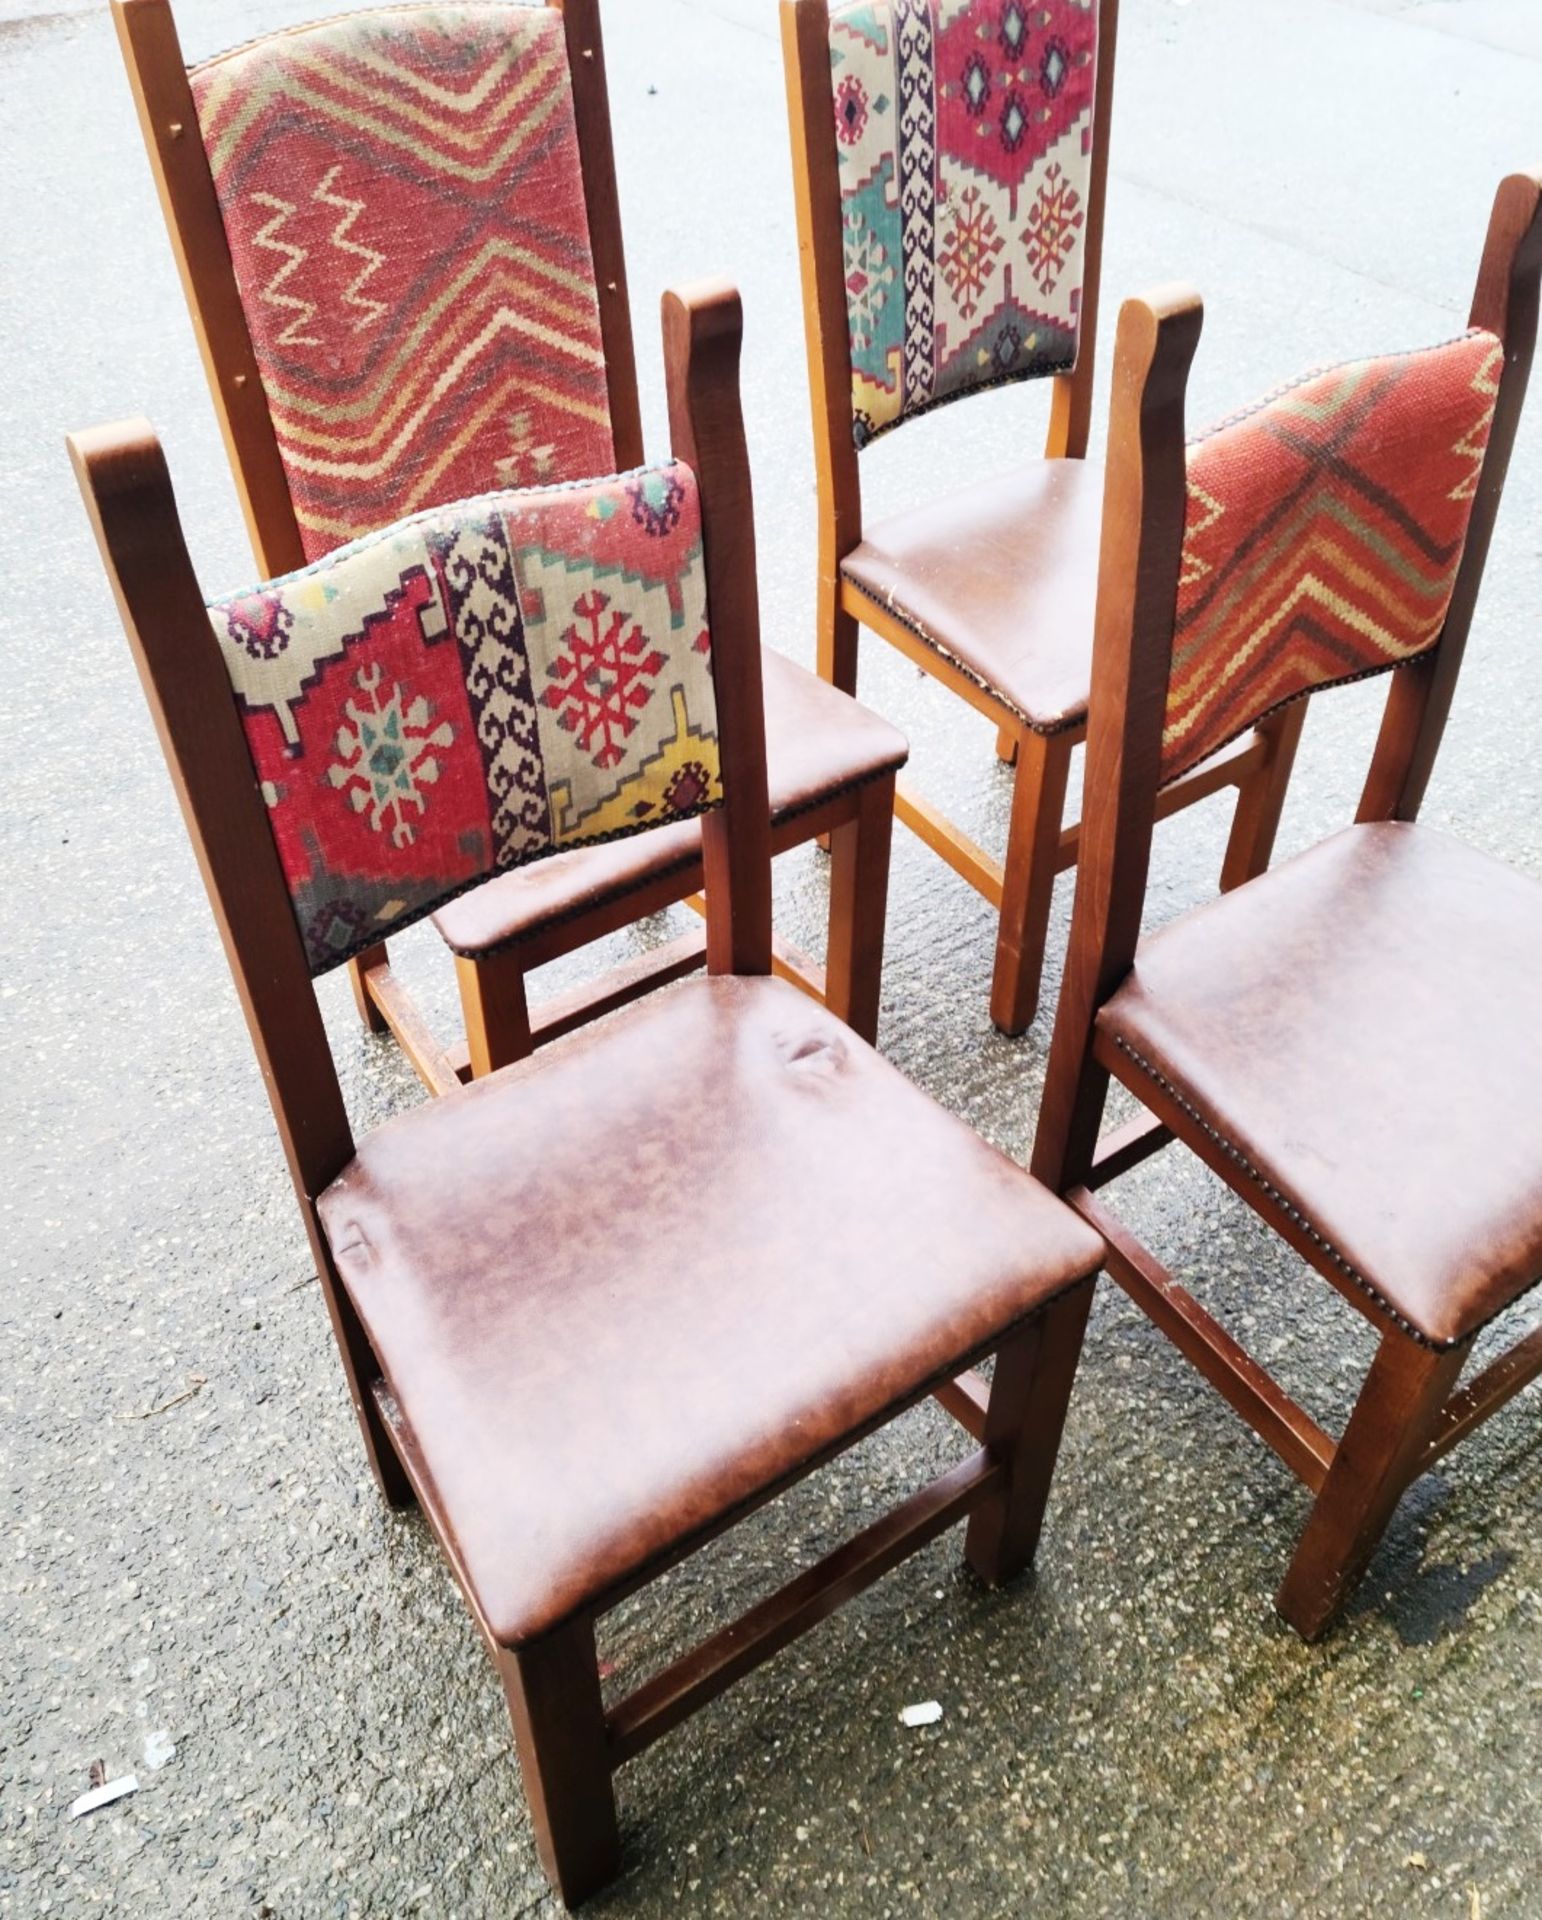 Set Of 4 x Aztec Print Dining Chairs With Faux Brown Leather Seating & Studded Seams - Image 5 of 6